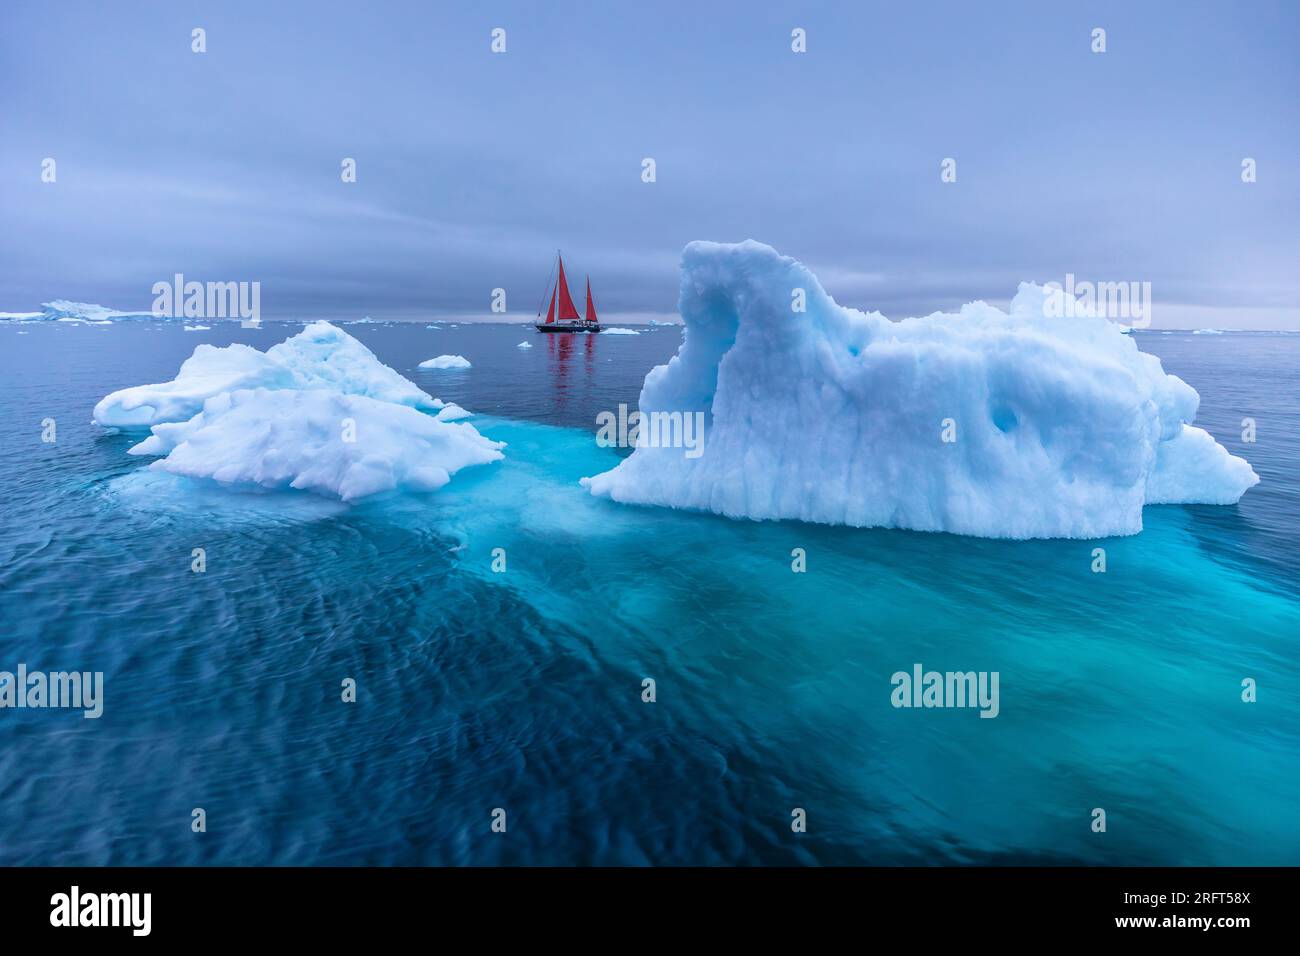 Red sails along Ilulissat Ice Fjord north of the Arctic Circle, Disko Bay, Greenland Stock Photo